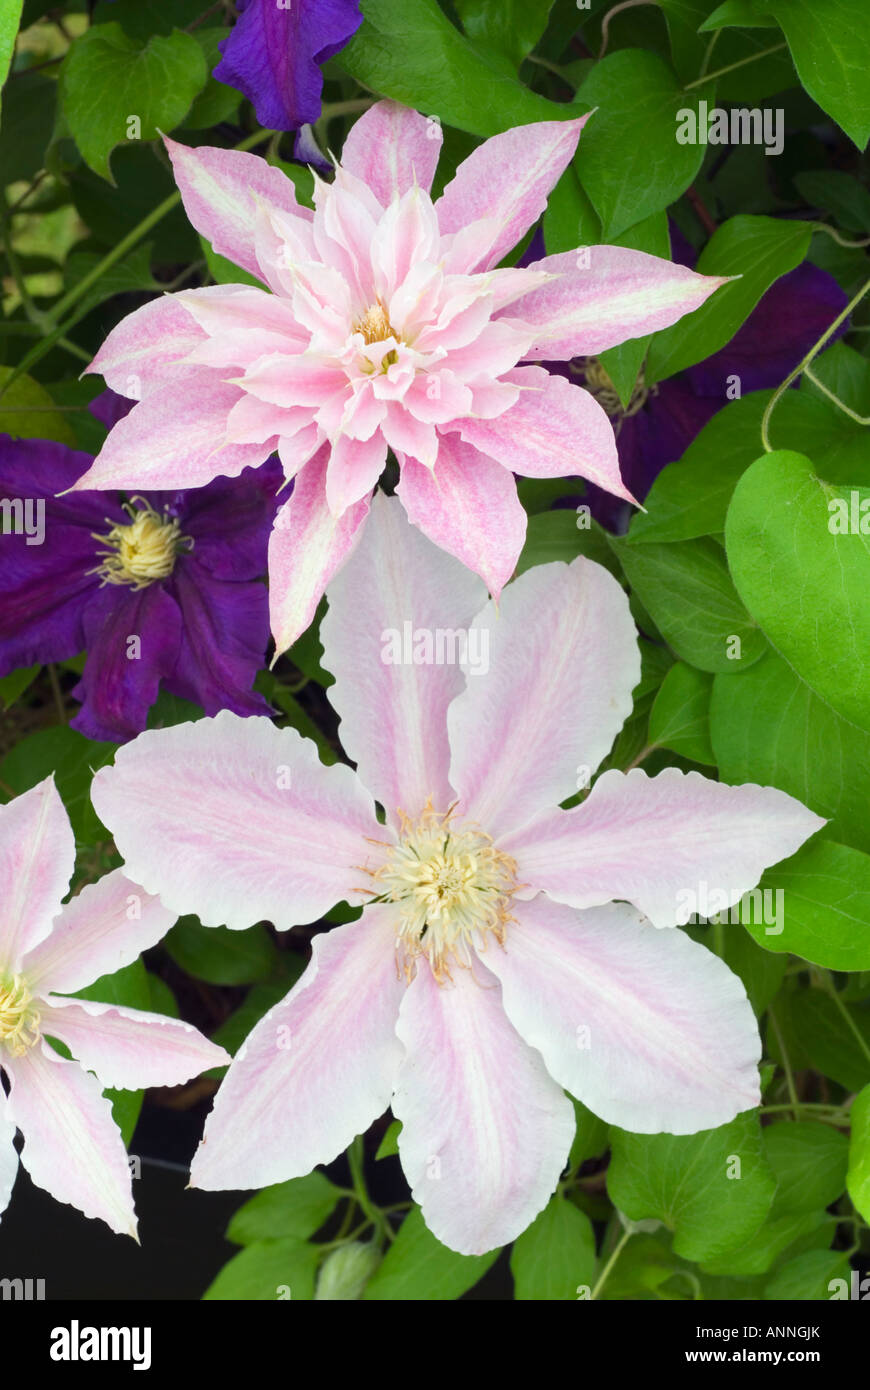 Clematis 'Prinsesse Alexandra' semi-double pink & white striped flowers and yellow stamens new variety closeup of two flowers Stock Photo